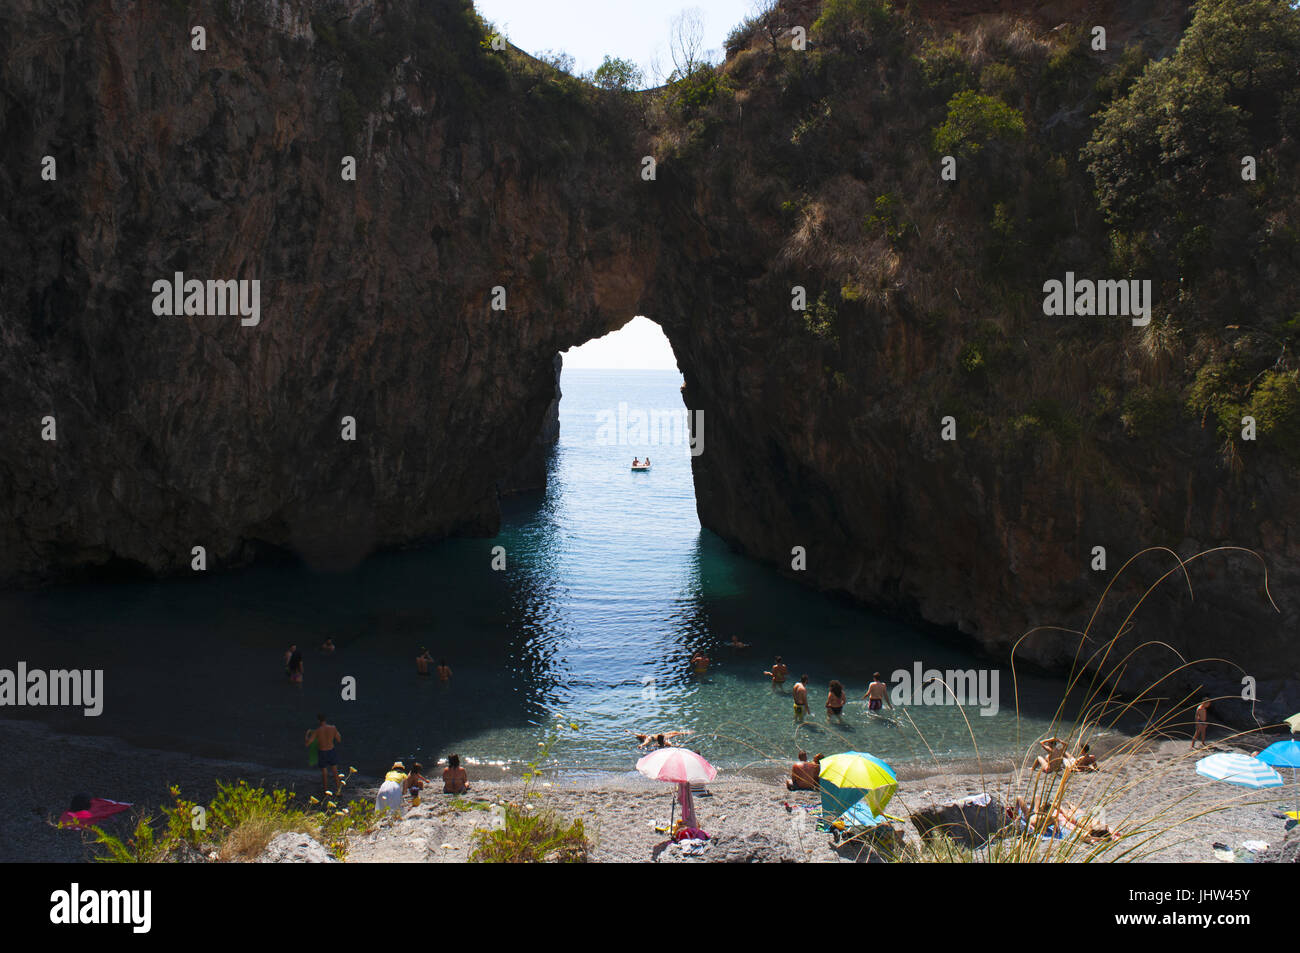 Calabria, Italy: the Arco Magno beach, the Great Arch beach, a hidden little bay with a natural arch done by the waves during the centuries Stock Photo